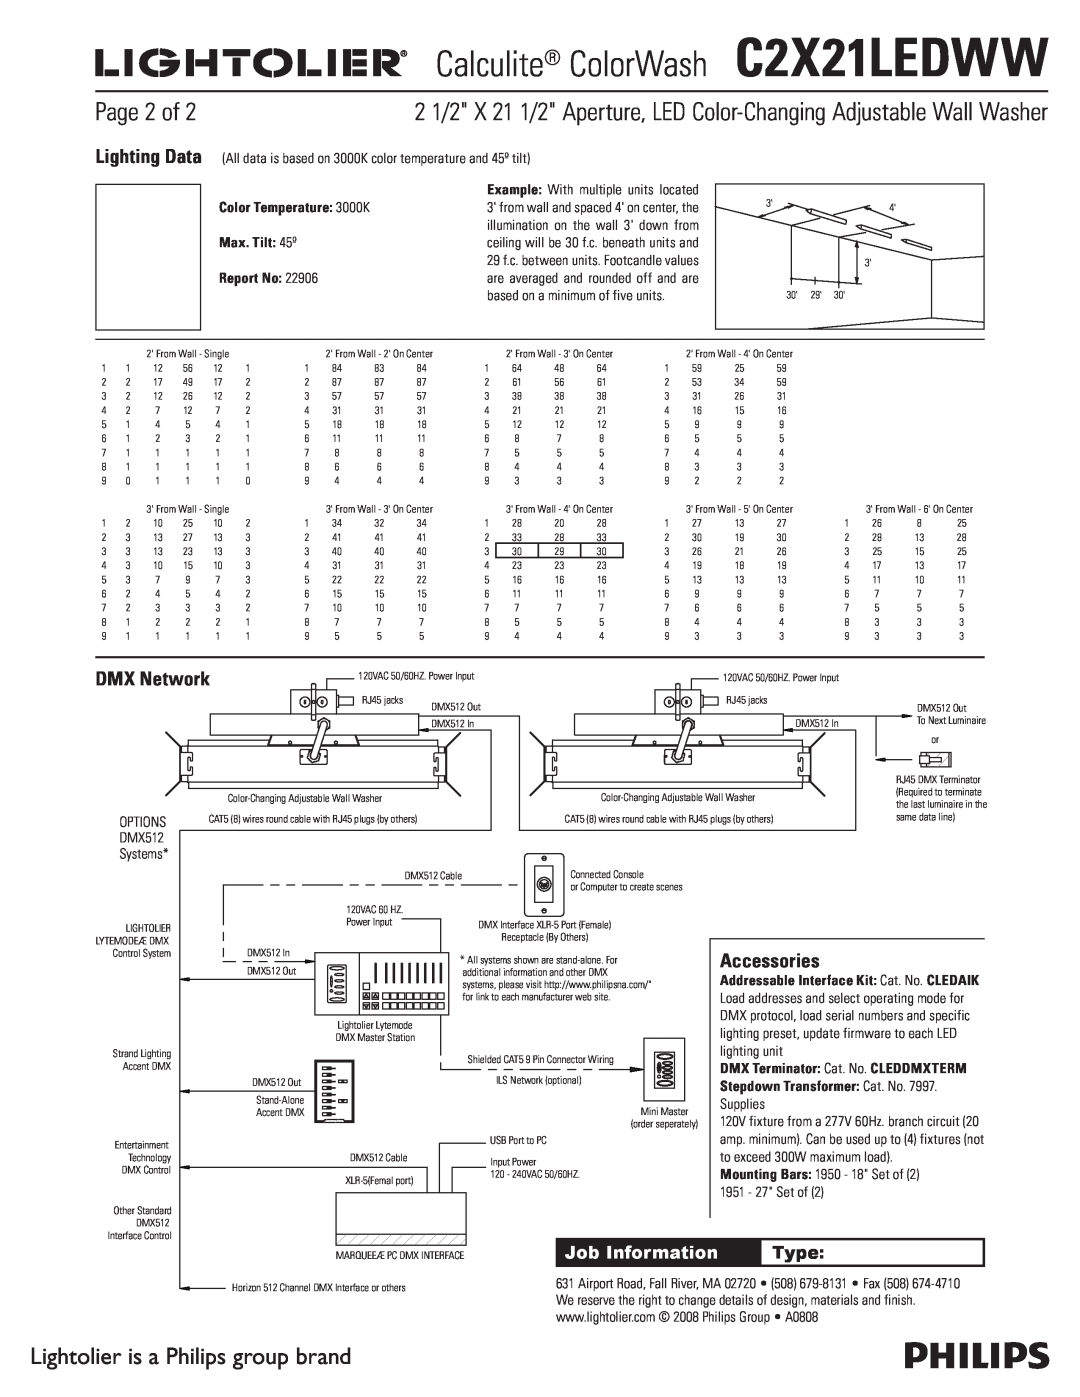 Lightolier C2X21LEDWW Page 2 of, DMX Network, Accessories, Type, based on a minimum of five units, lighting unit, Supplies 